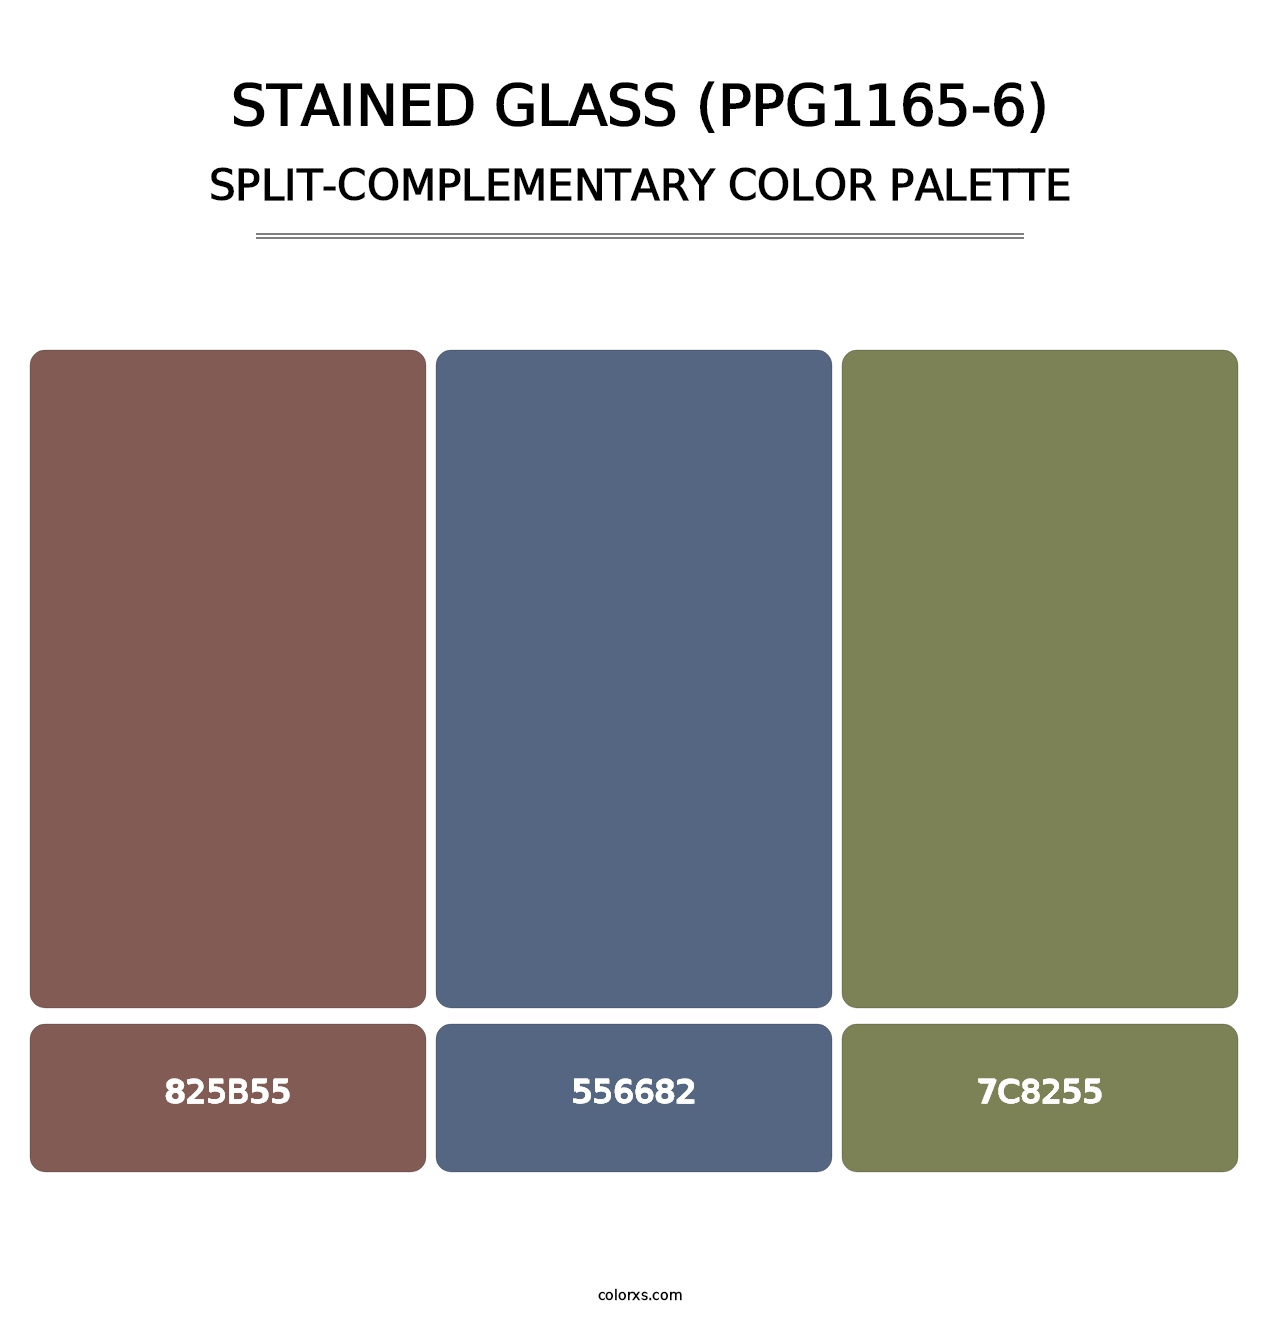 Stained Glass (PPG1165-6) - Split-Complementary Color Palette